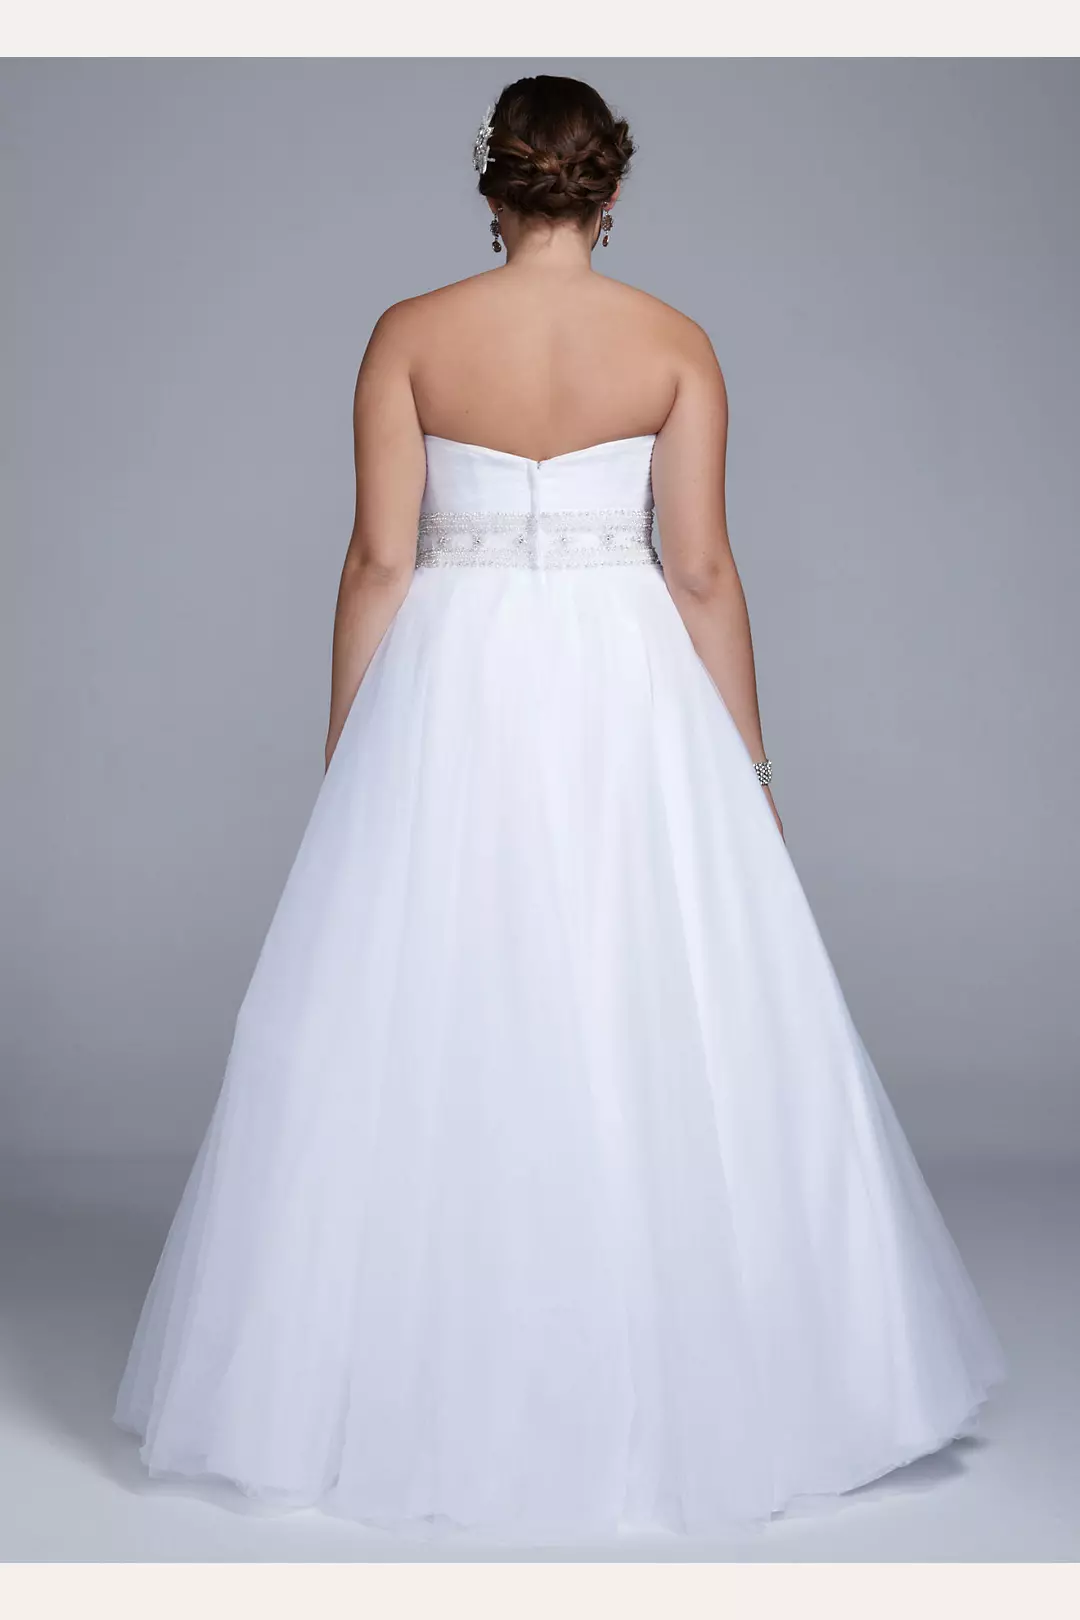 Extra Length Strapless Ball Gown with Beaded Belt Image 2